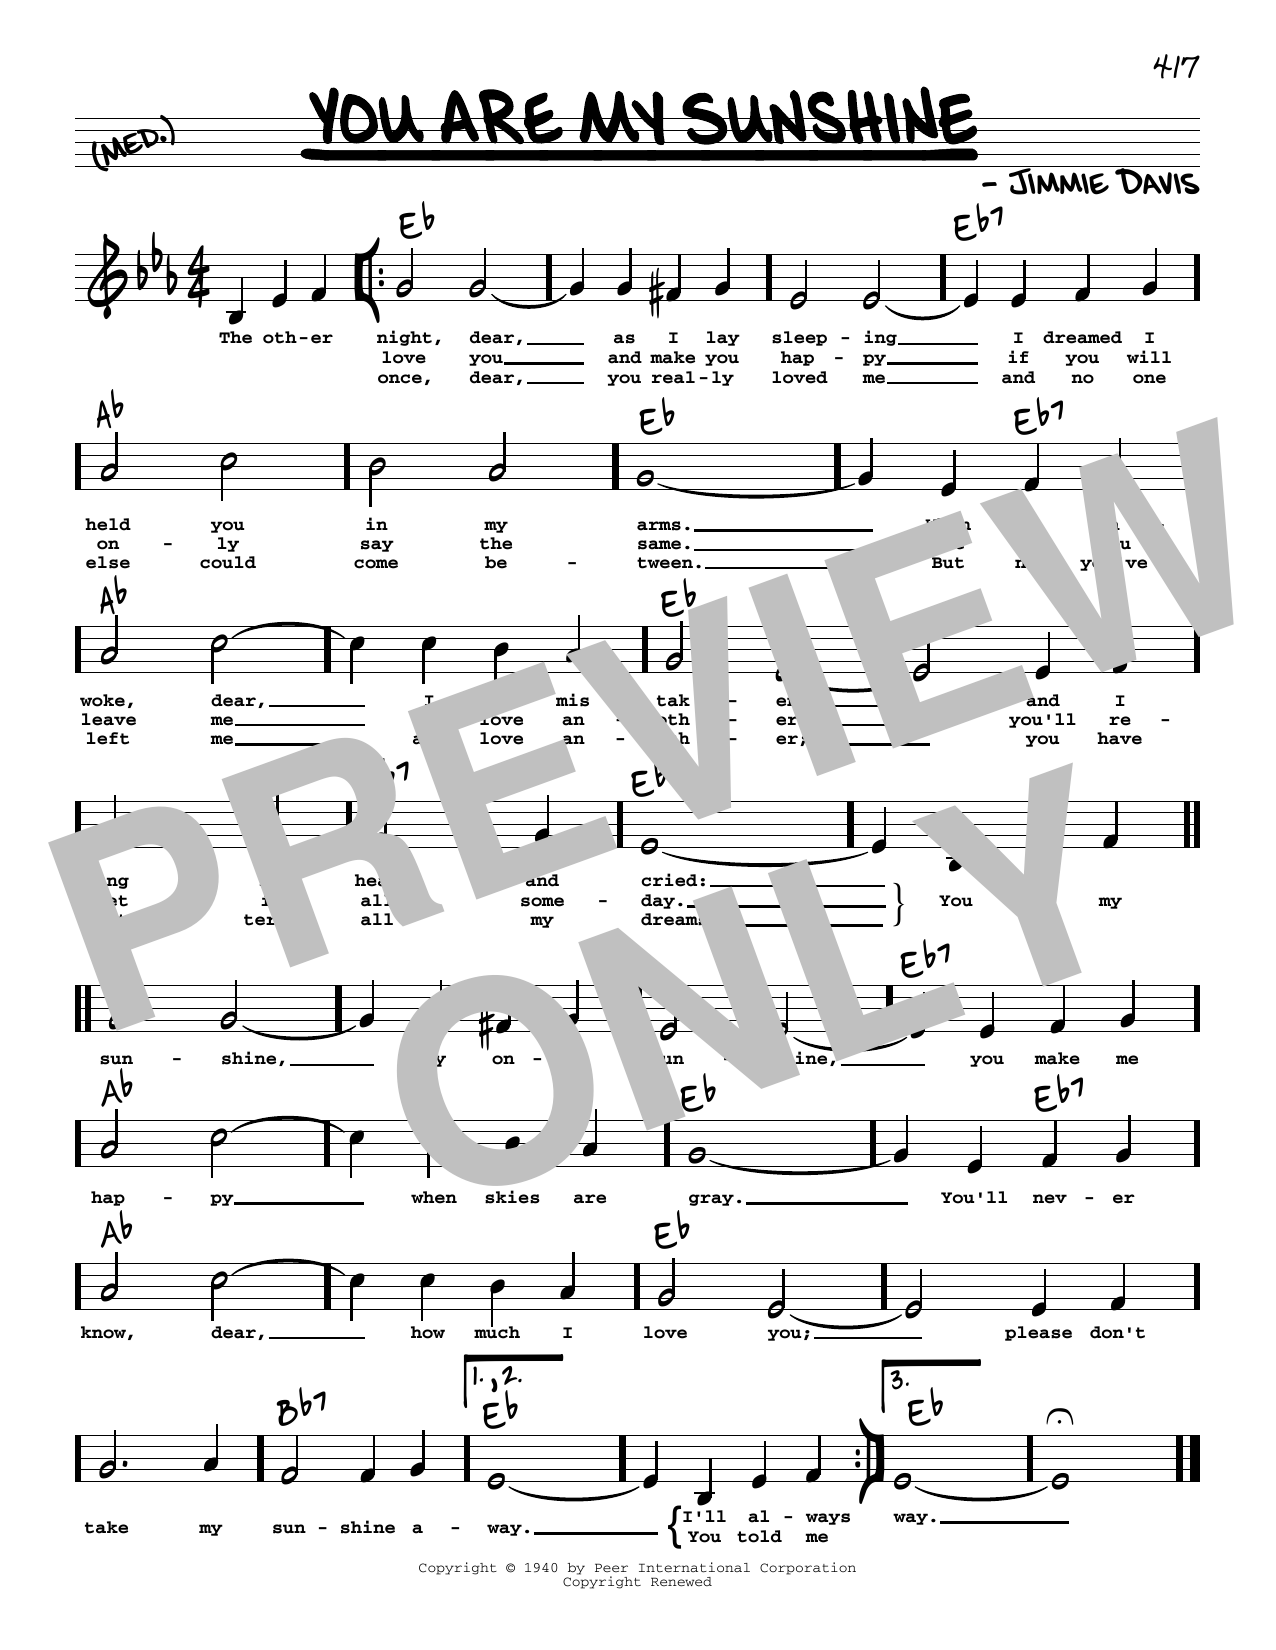 Download Duane Eddy You Are My Sunshine (Low Voice) Sheet Music